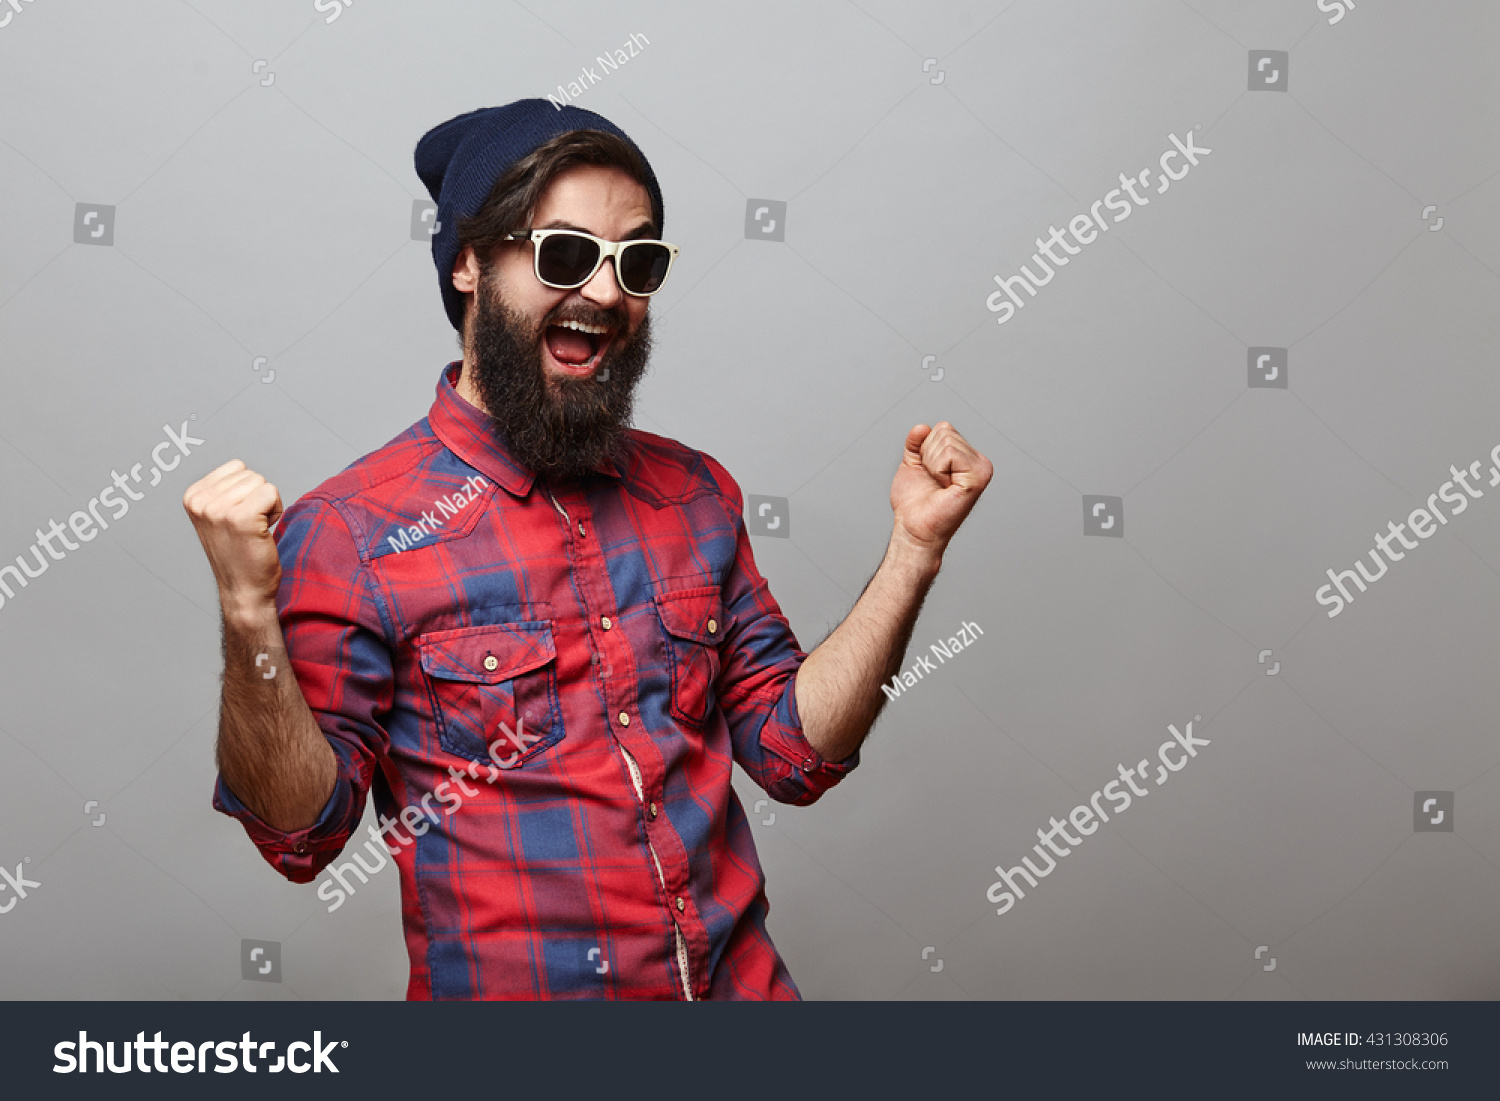 stock-photo-lucky-young-hipster-man-isolated-over-grey-background-bearded-man-wearing-glasses-and-hat-acts-431308306.jpg